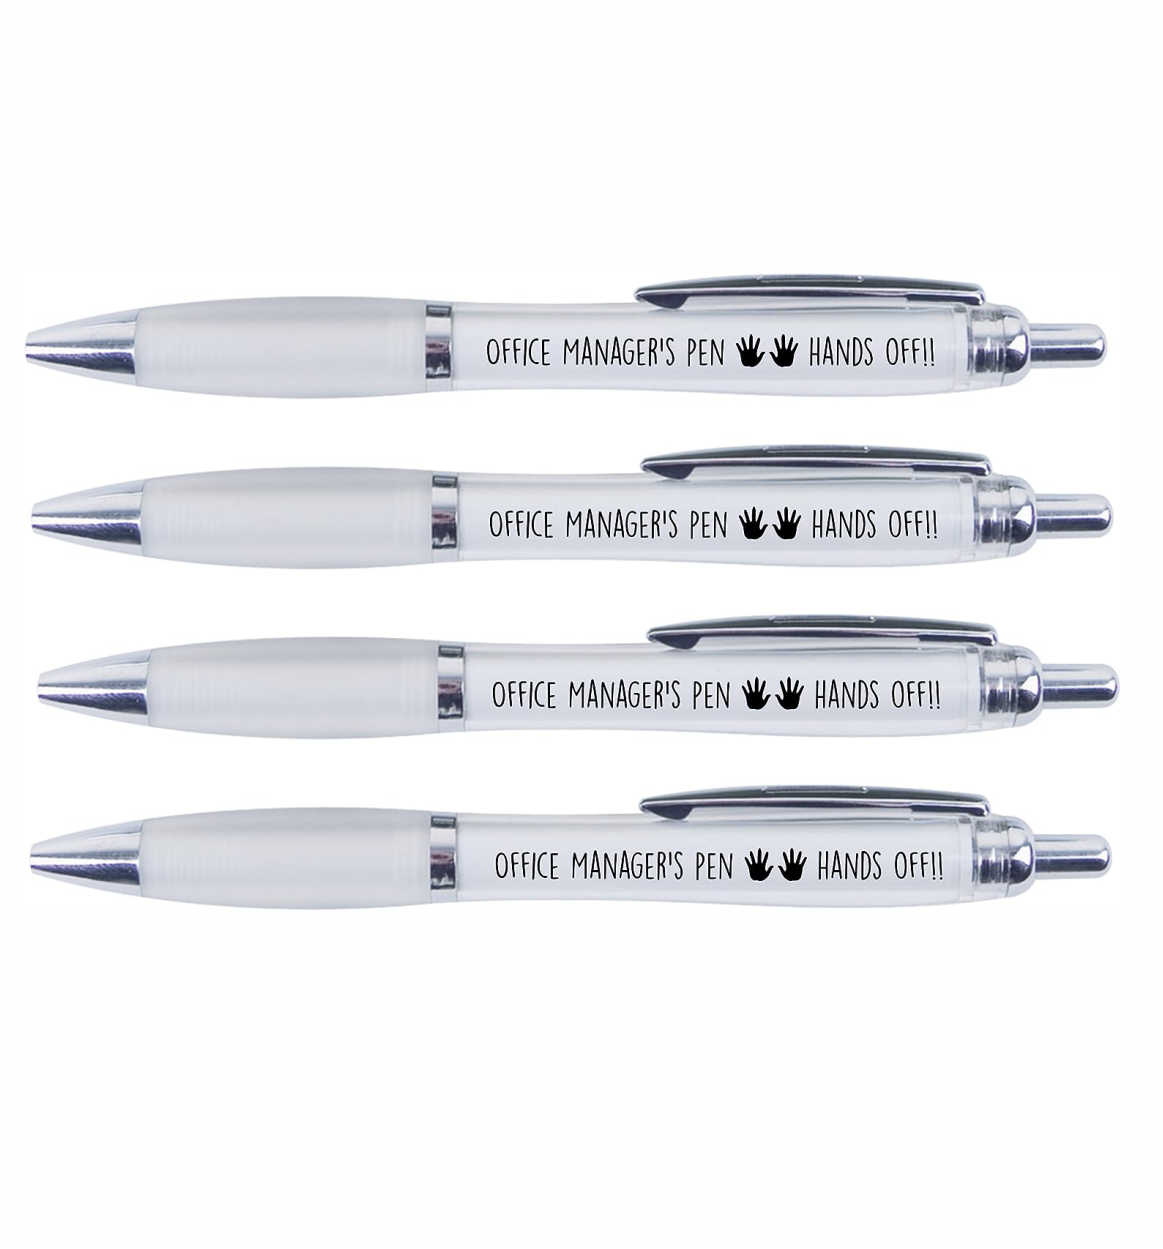 4 x Office manager's Pens "HANDS OFF"